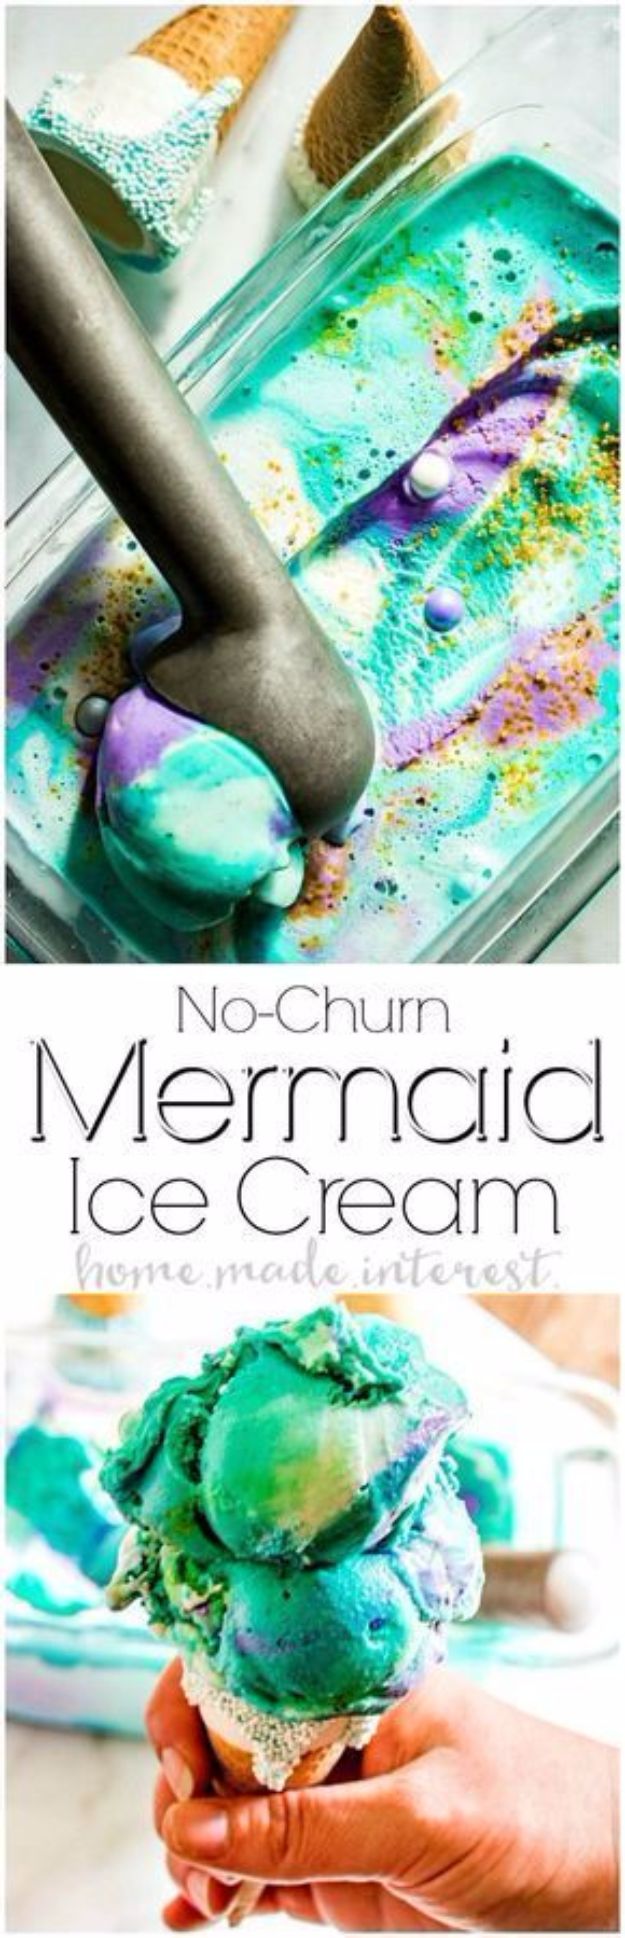 DIY Mermaid Crafts - No Churn Mermaid Ice Cream - How To Make Room Decorations, Art Projects, Jewelry, and Makeup For Kids, Teens and Teenagers - Mermaid Costume Tutorials - Fun Clothes, Pillow Projects, Mermaid Tail Tutorial 